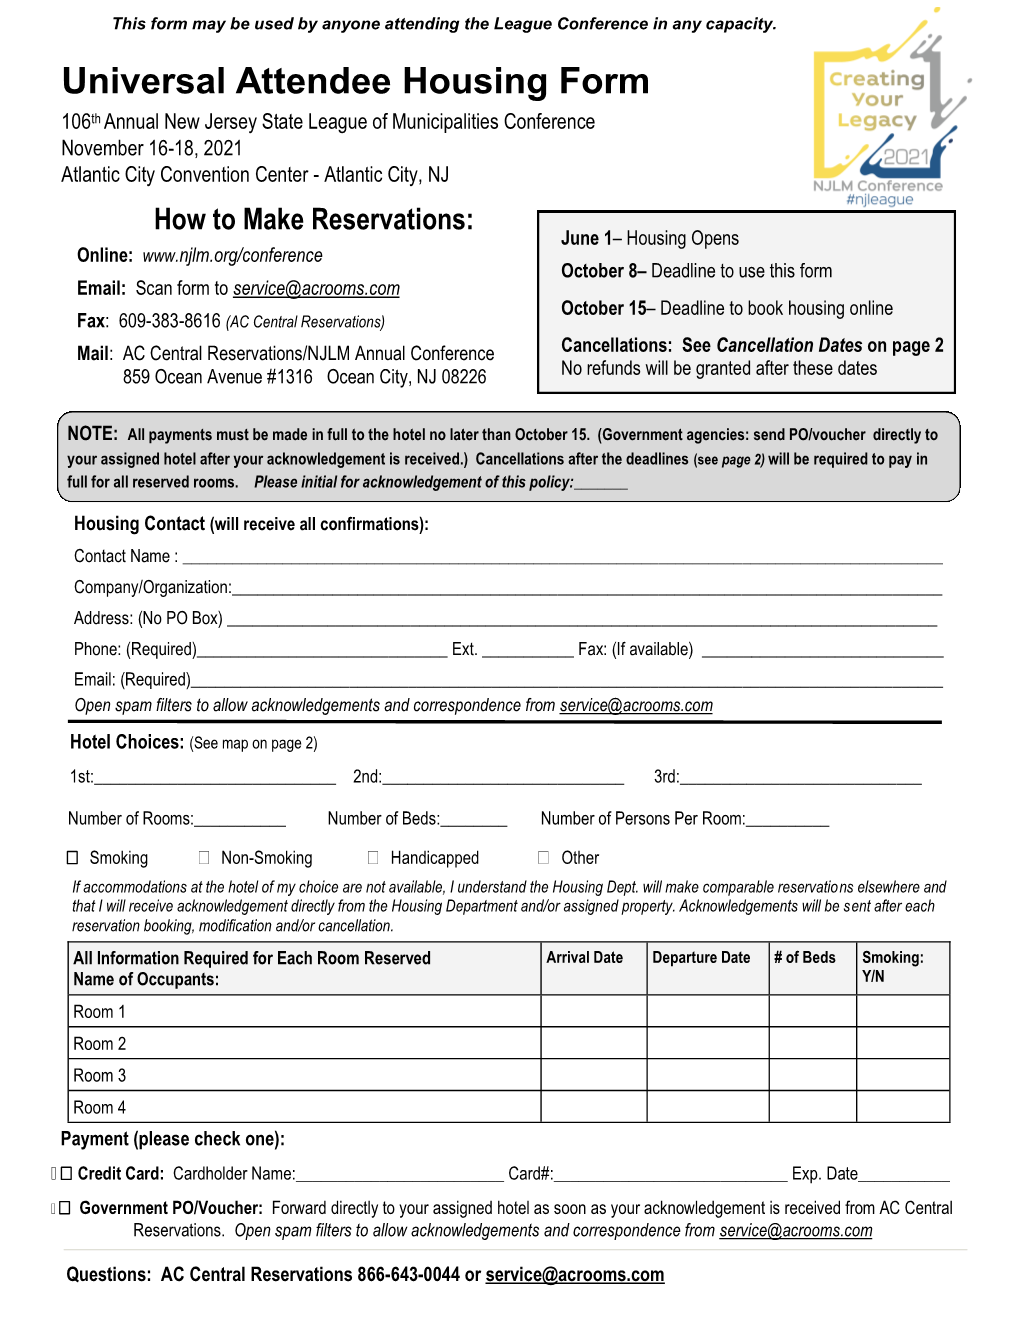 Universal Attendee Housing Form